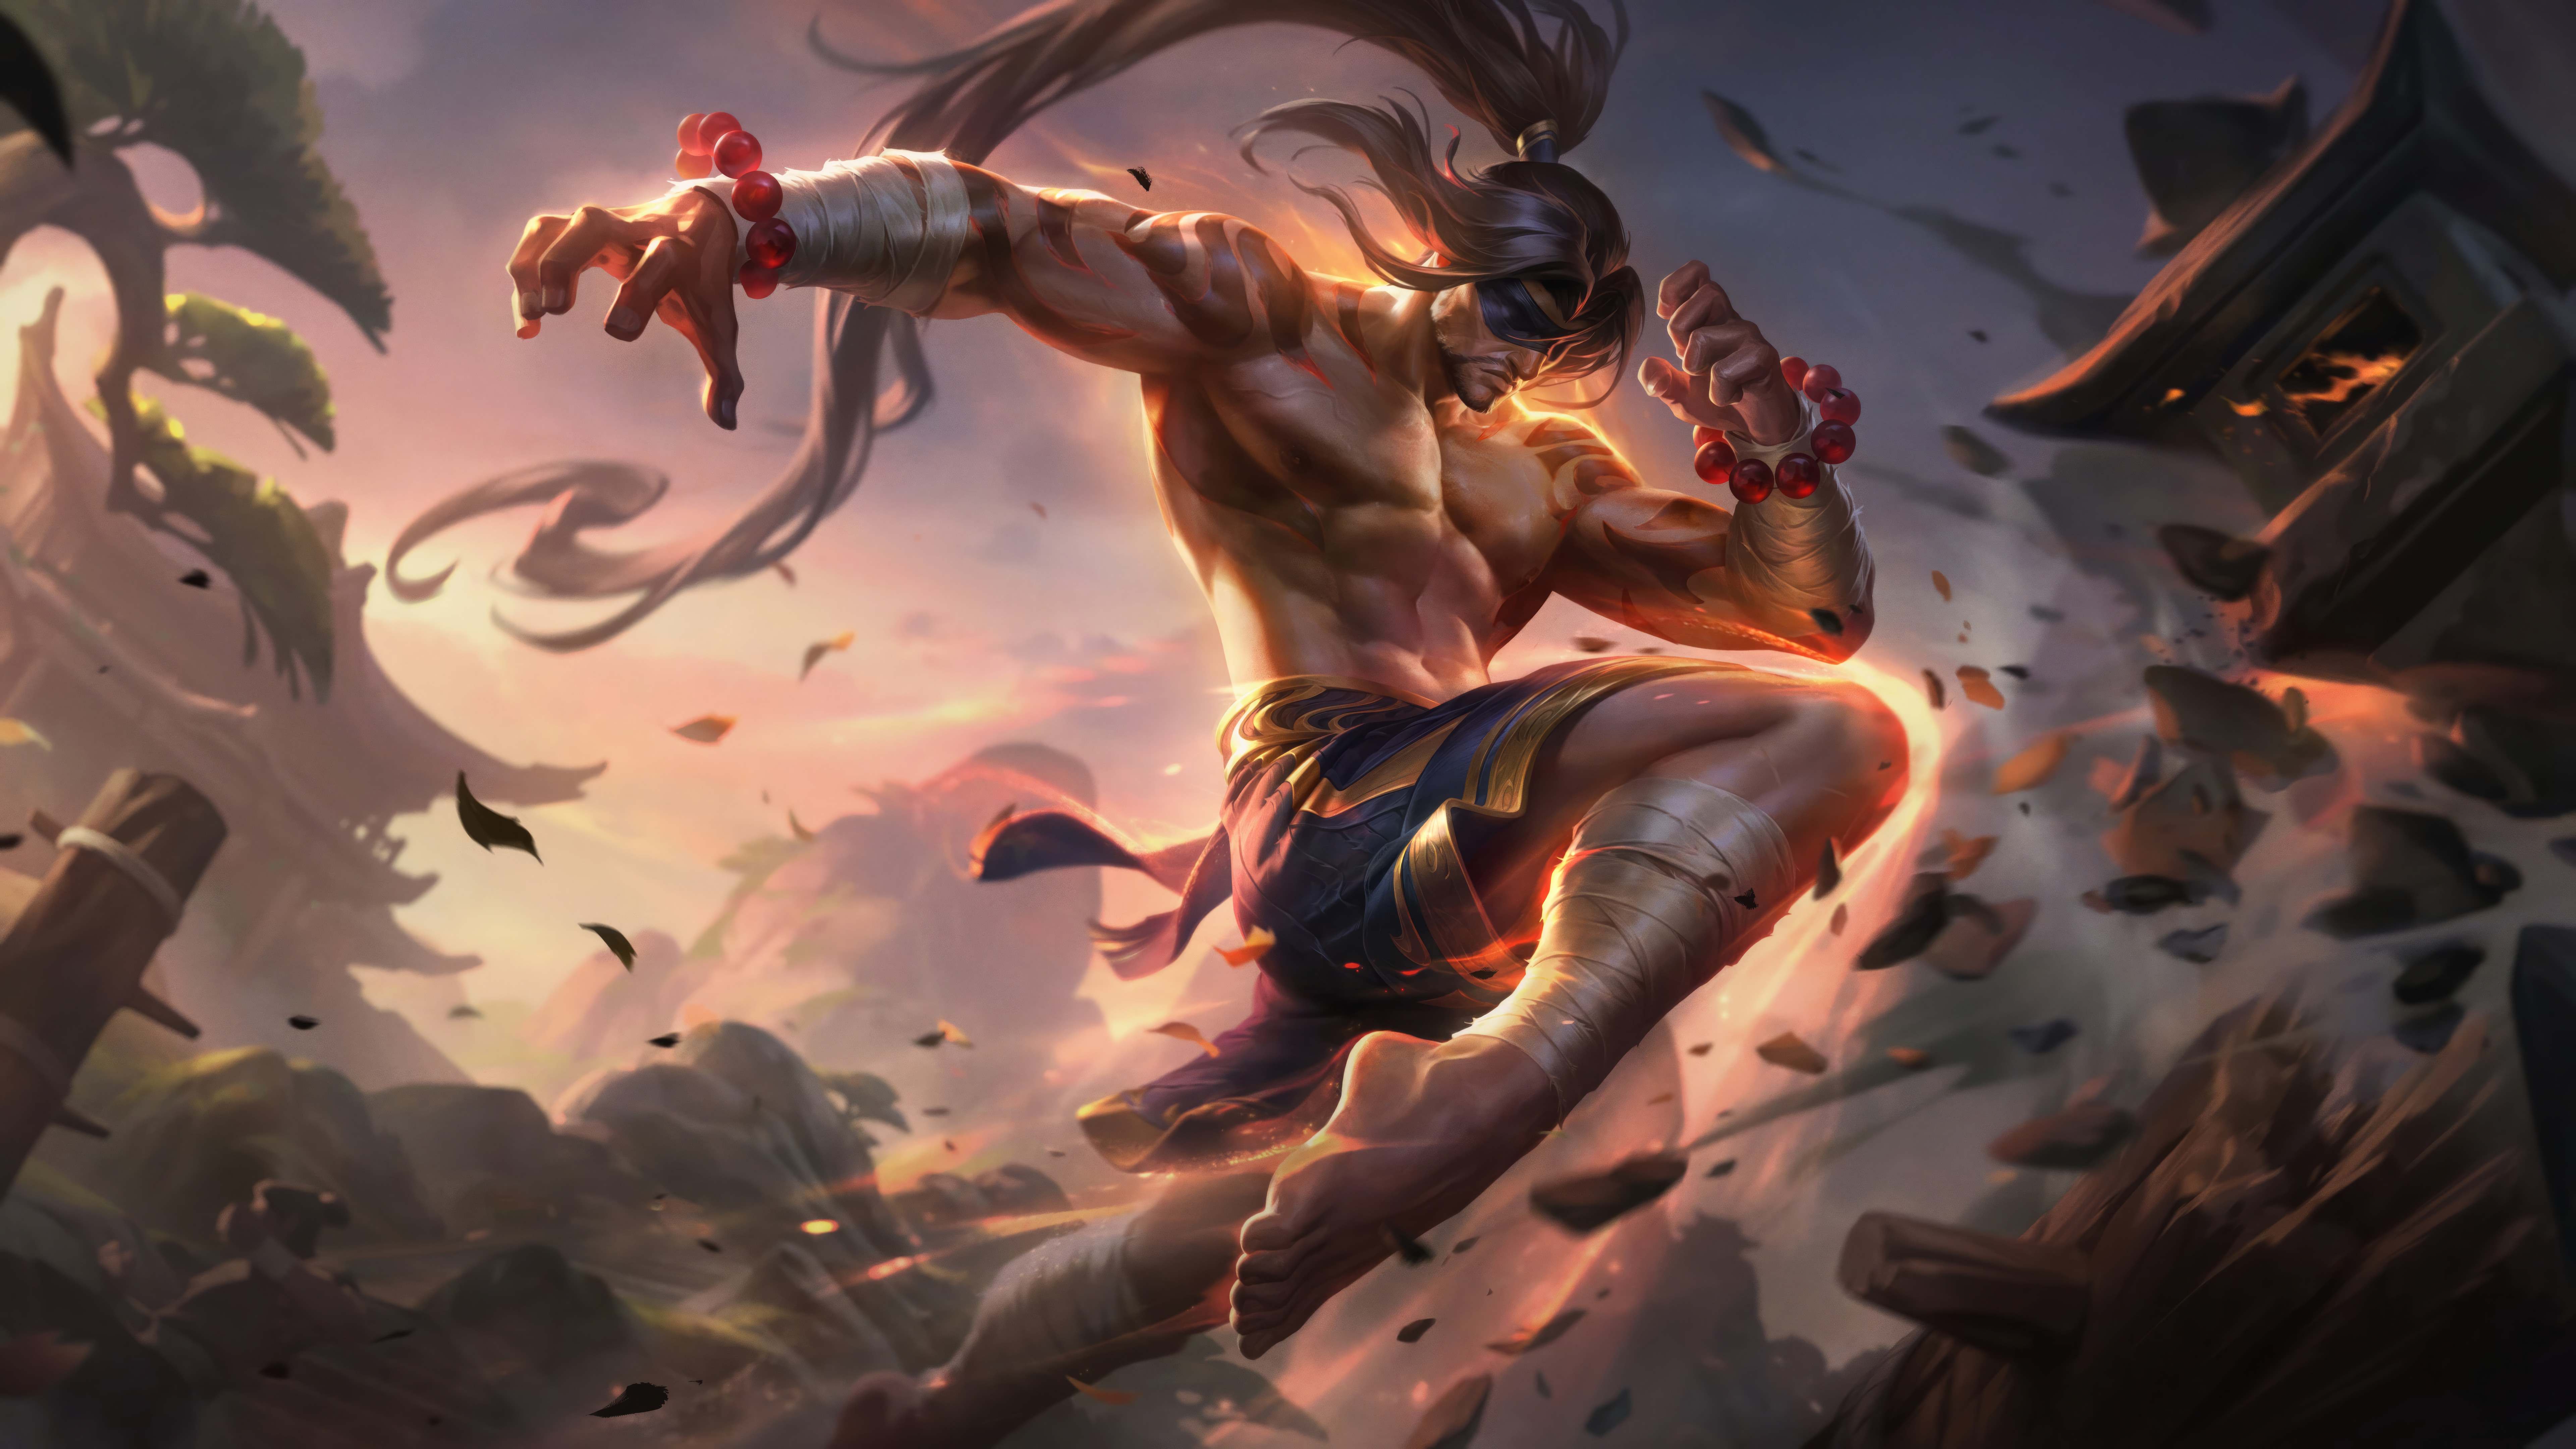 General 7680x4320 Lee Sin (League of Legends) video games GZG Riot Games digital art League of Legends sky video game characters 4K video game art ponytail video game men long hair sunset sunset glow bandages blindfold closed mouth beard pointed toes muscles